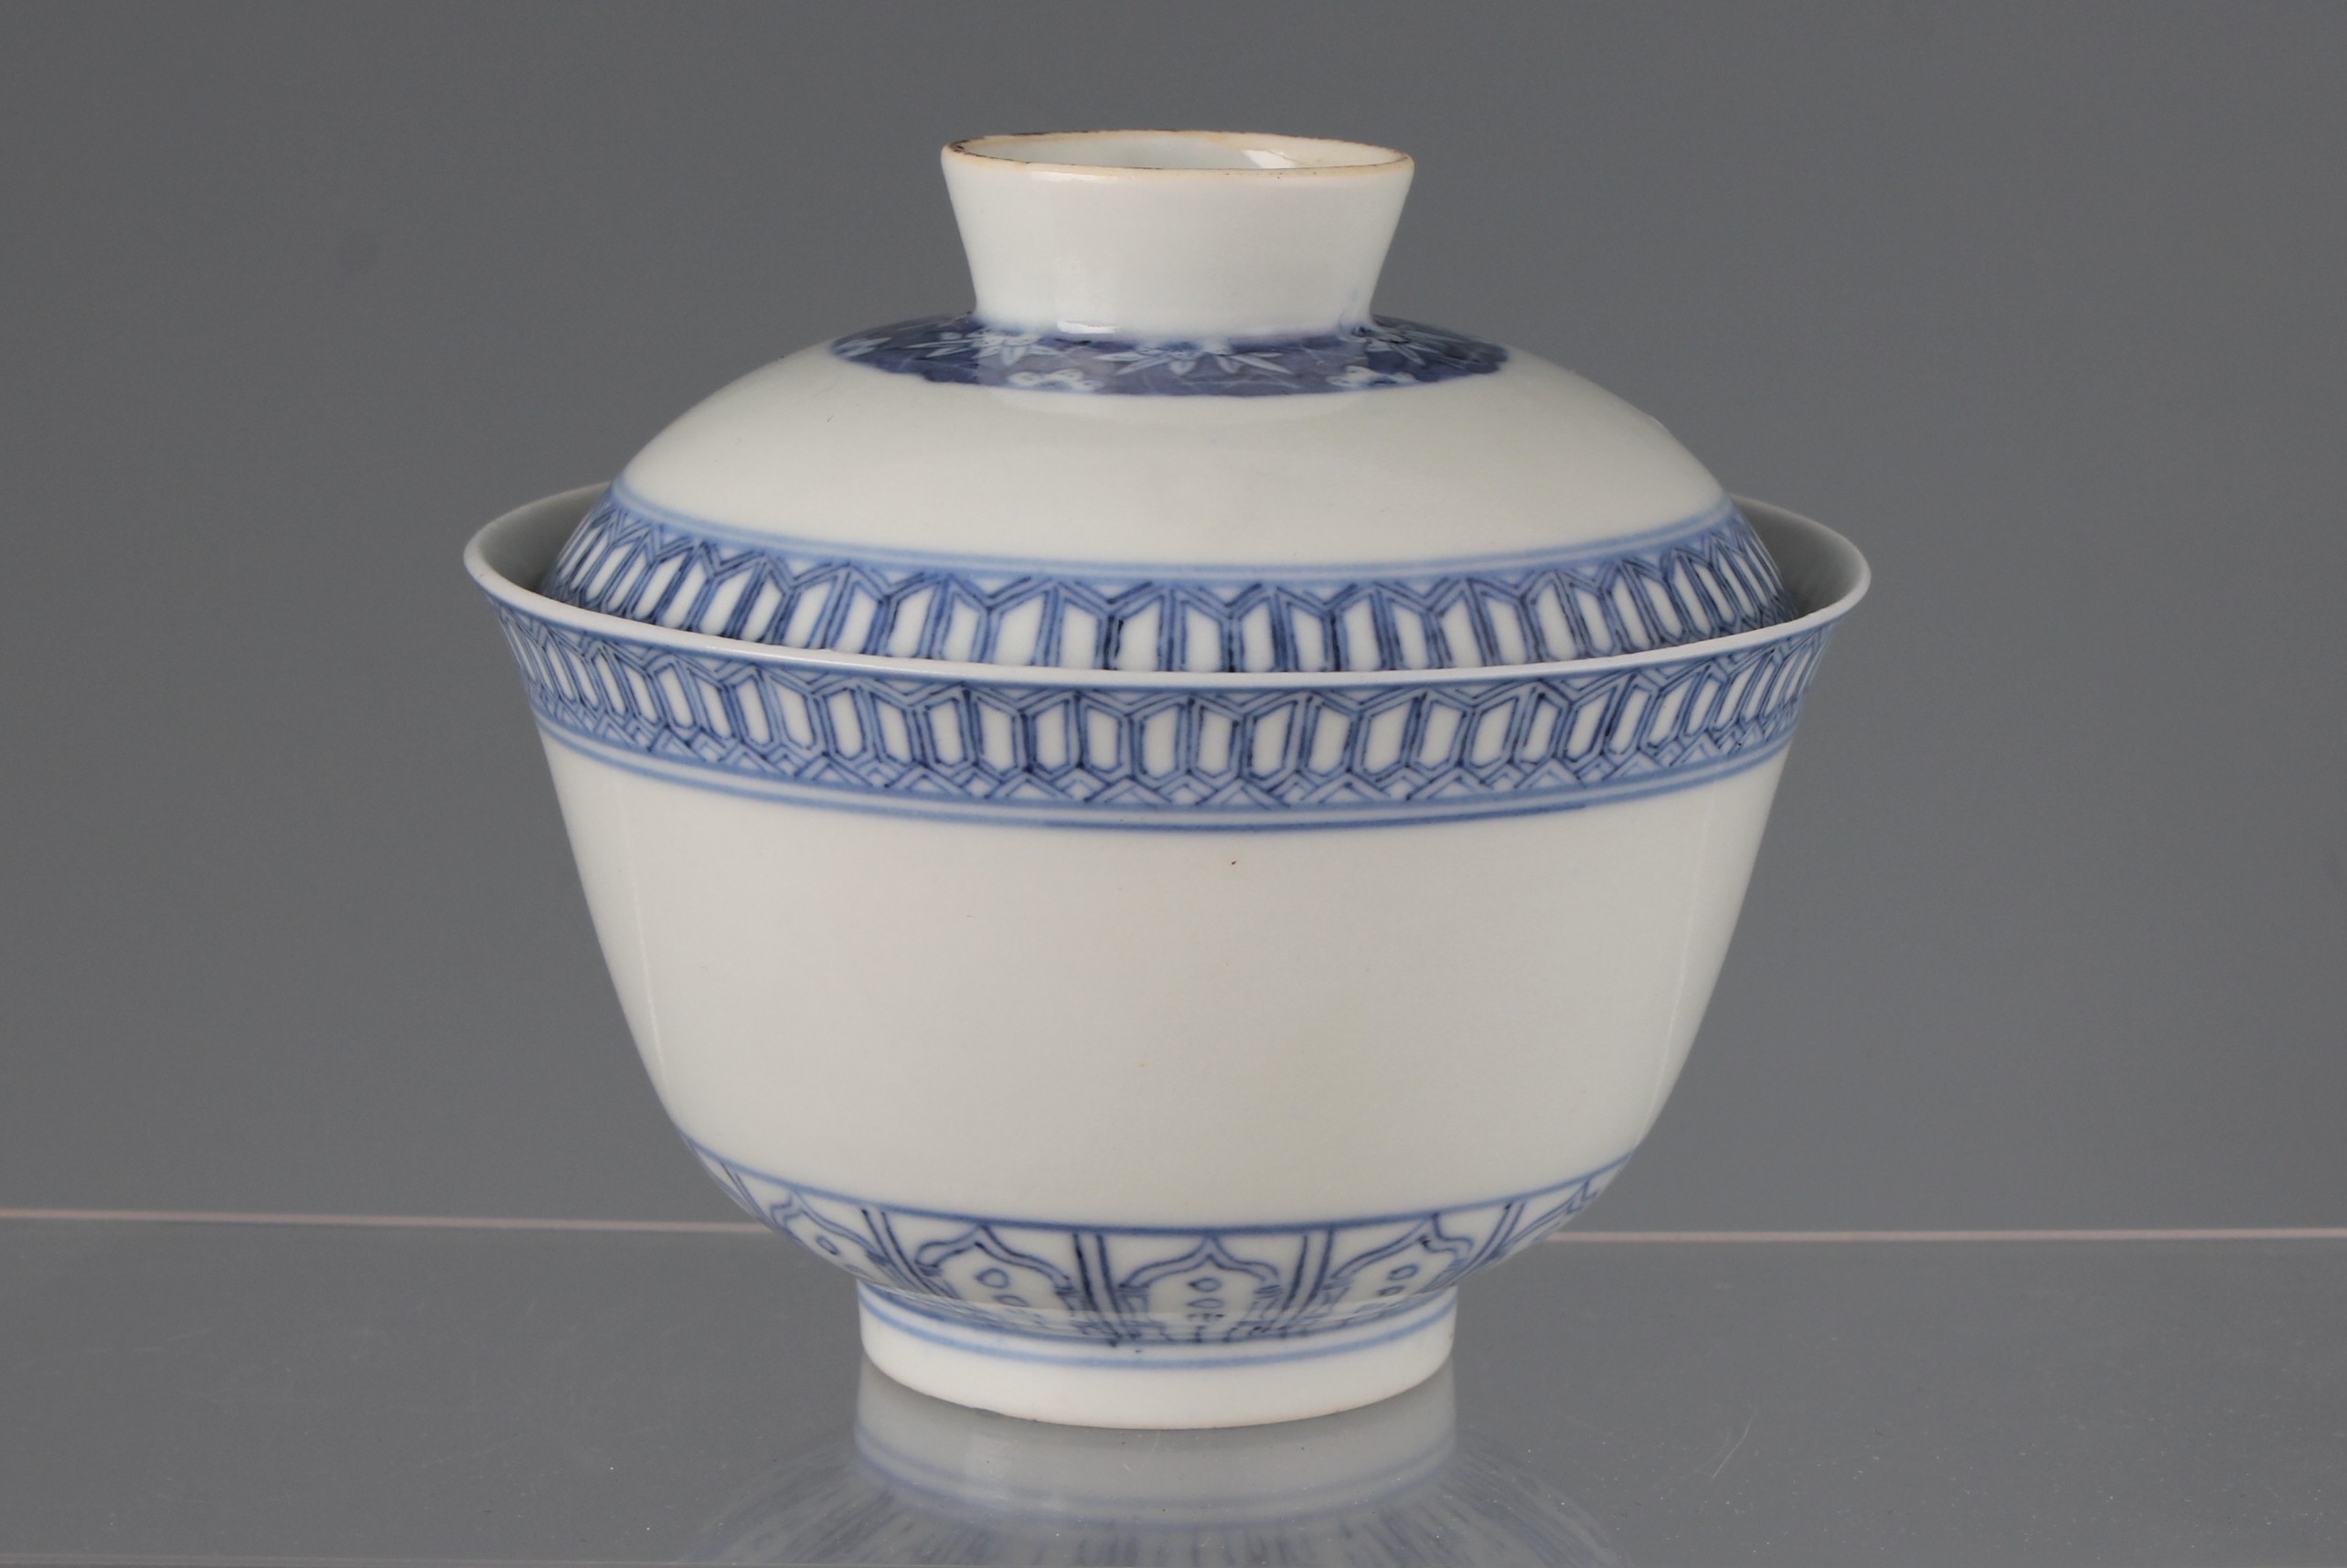 A Chinese porcelain tea bowl and cover of gaiwan form, saucer lacking, the footed body decorated in